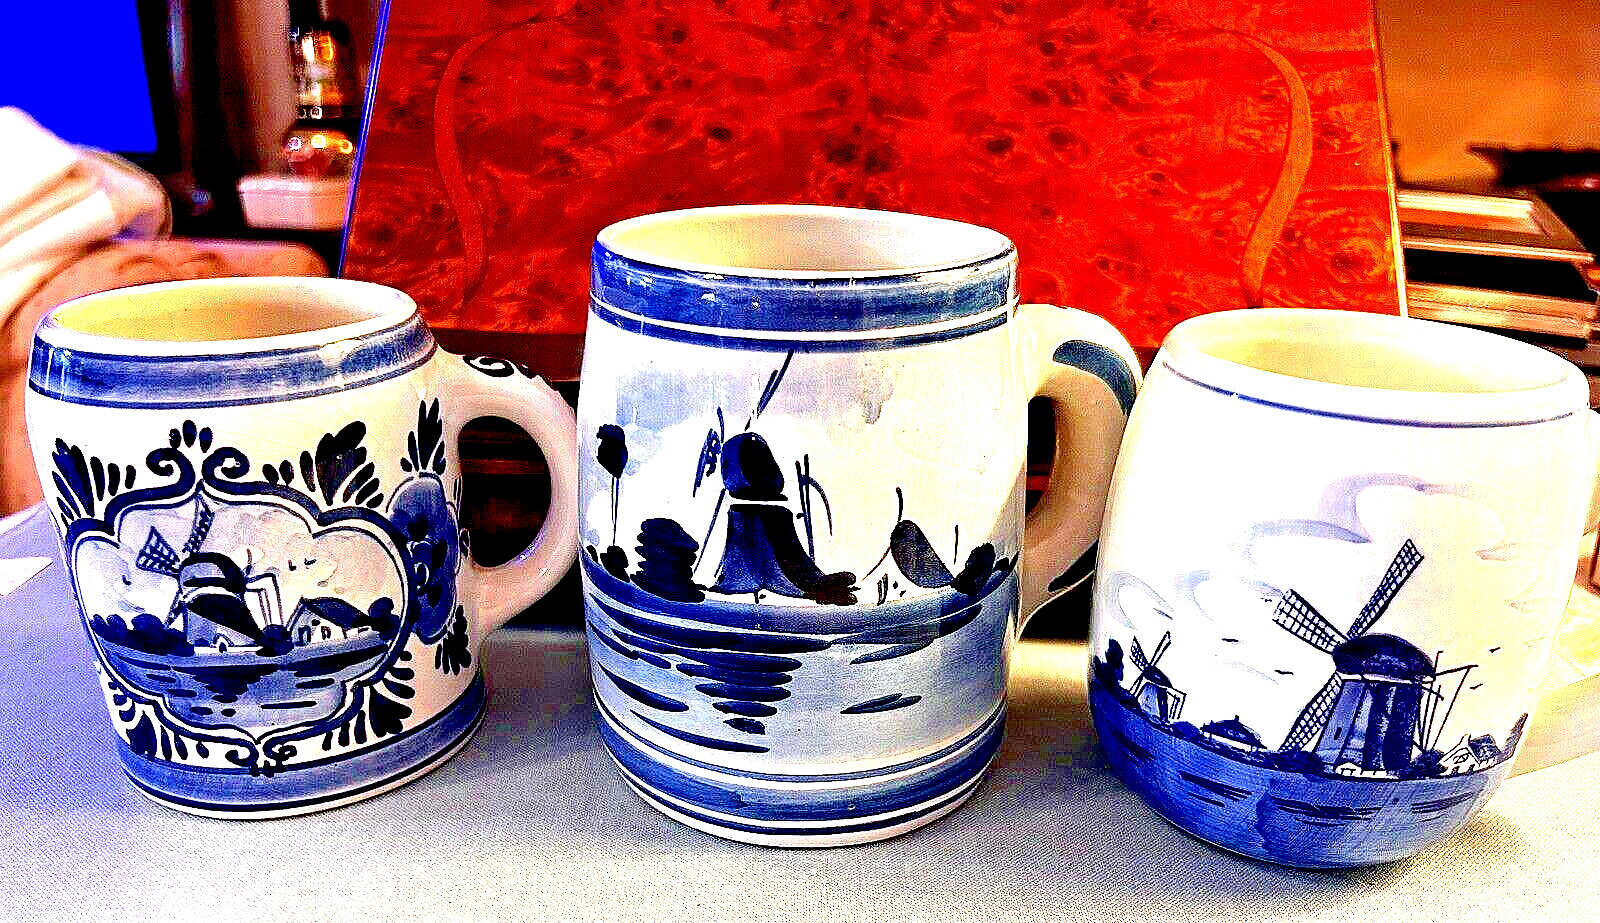 3 VTG DELFT BLUE MUGS - HOLLAND - HAND PAINTED DUTCH POTTERY- SO COLLECTABLE